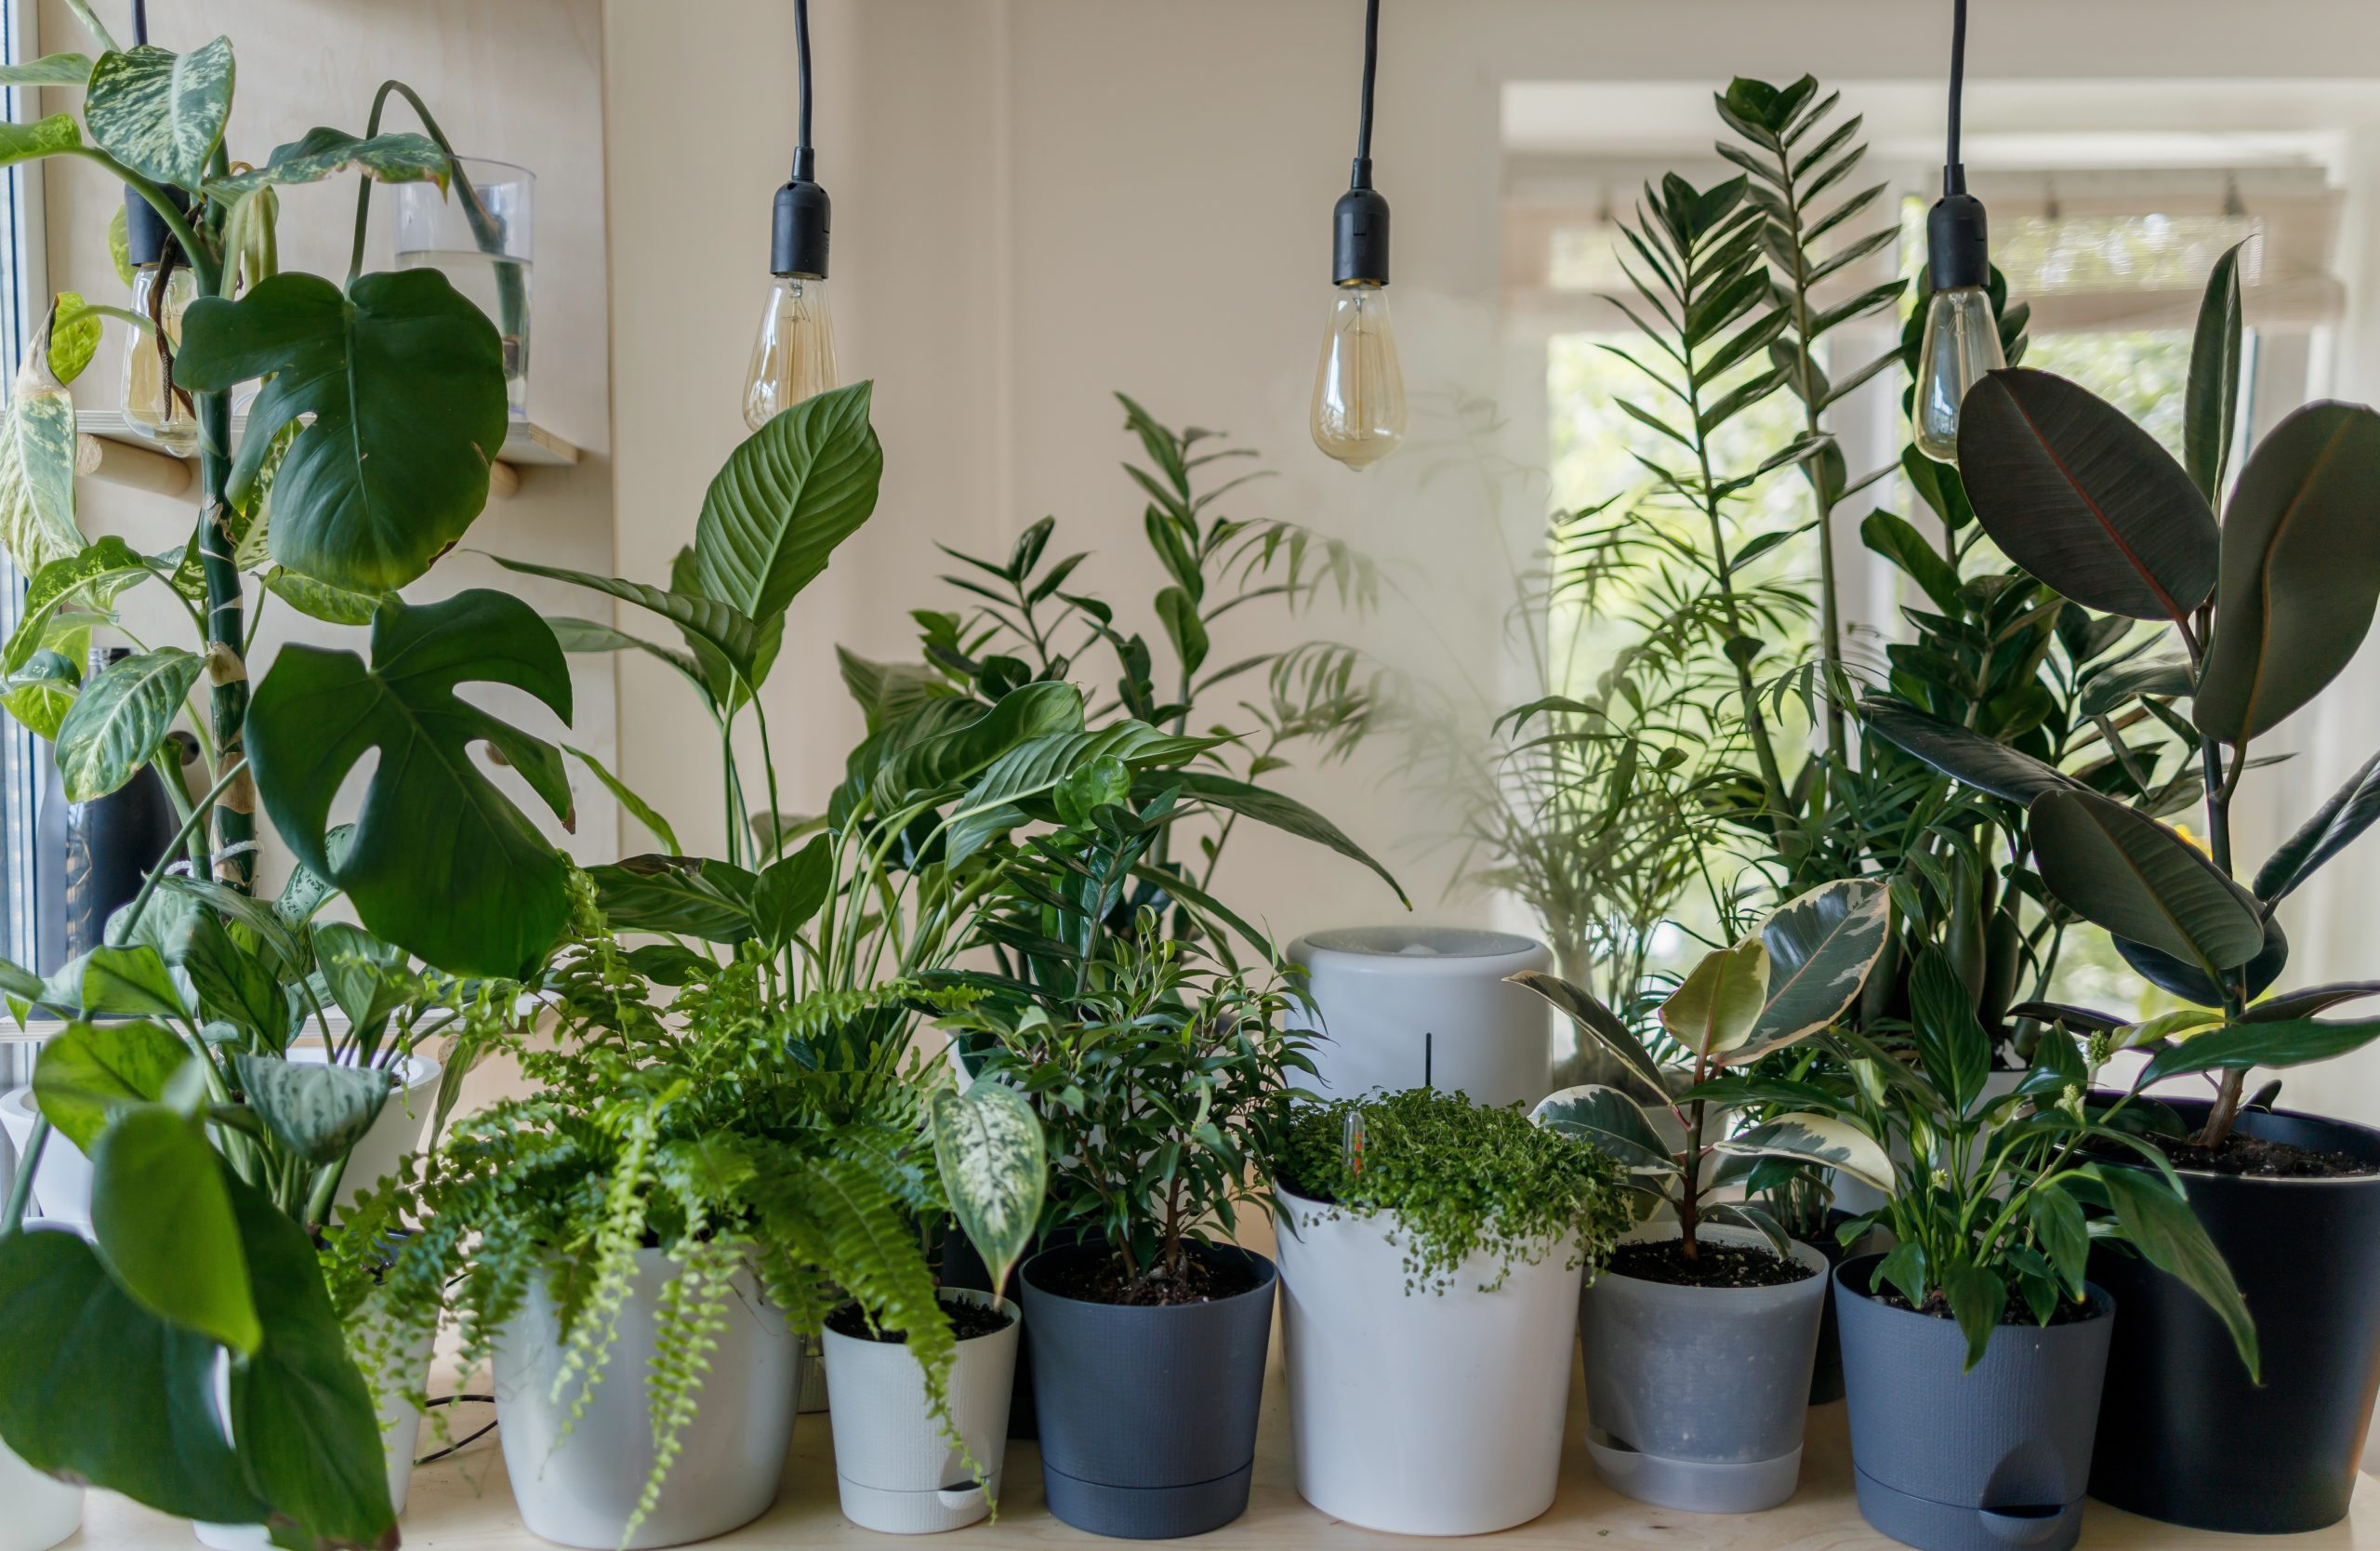 How To Transplant Houseplants plants in pots scaled